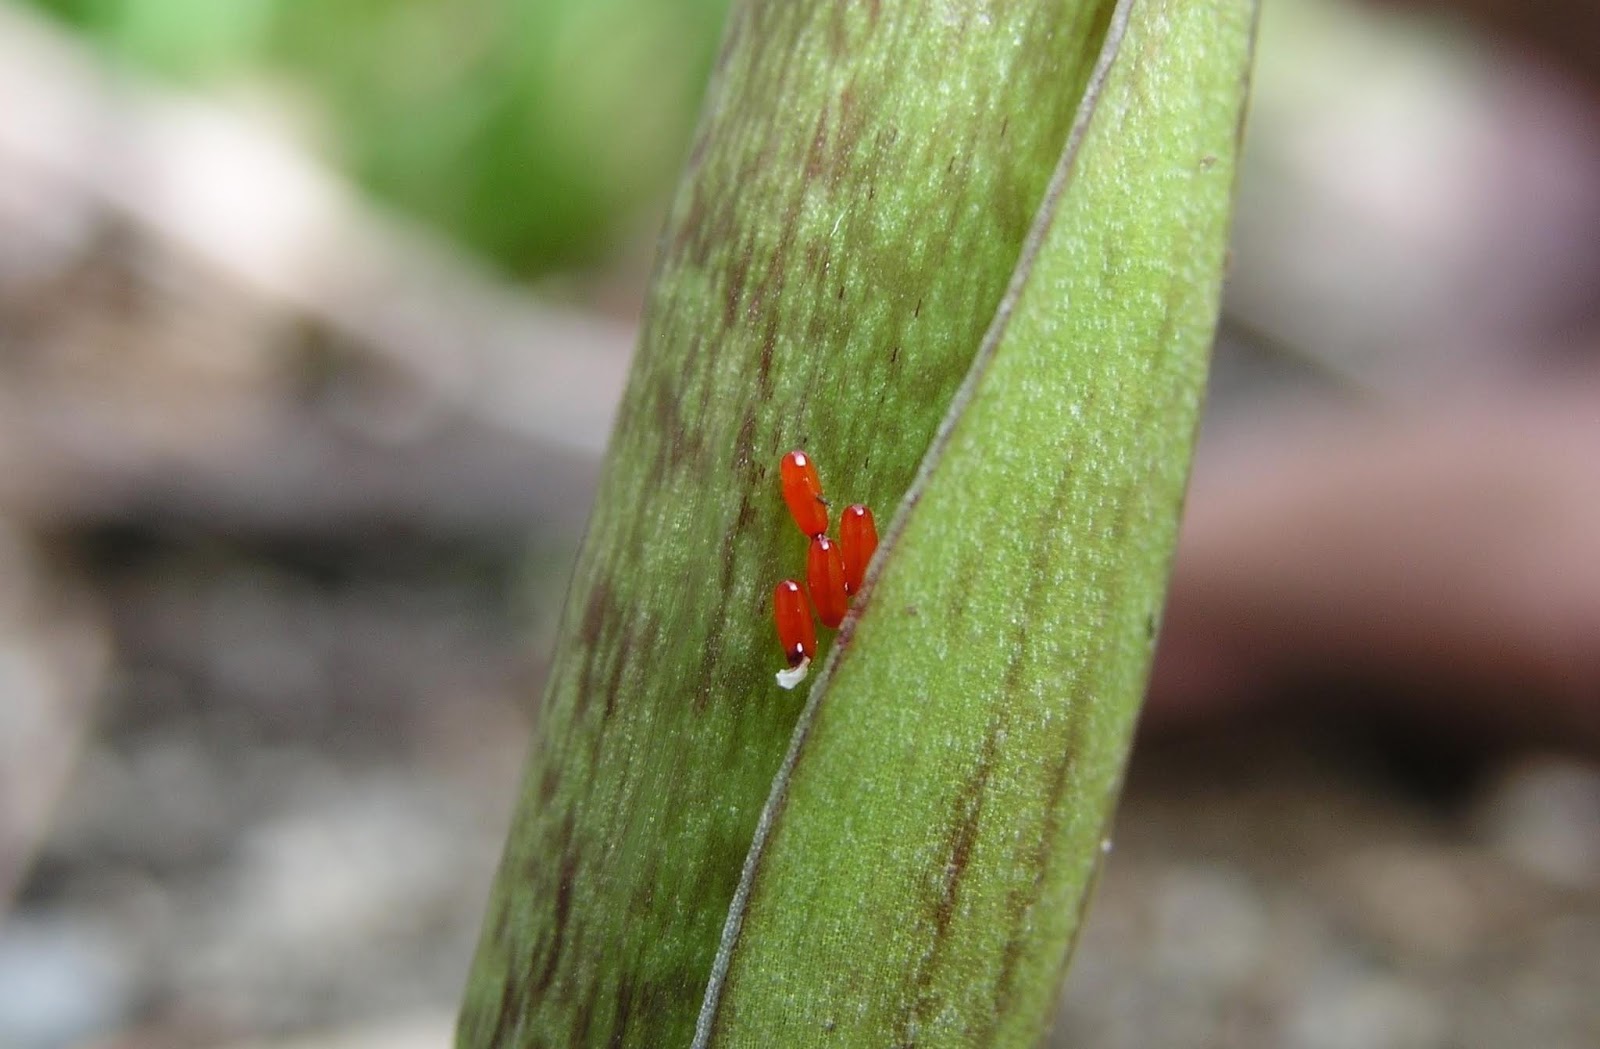 WSDA AgBriefs: Pest Alert! Lily leaf beetle is on the move